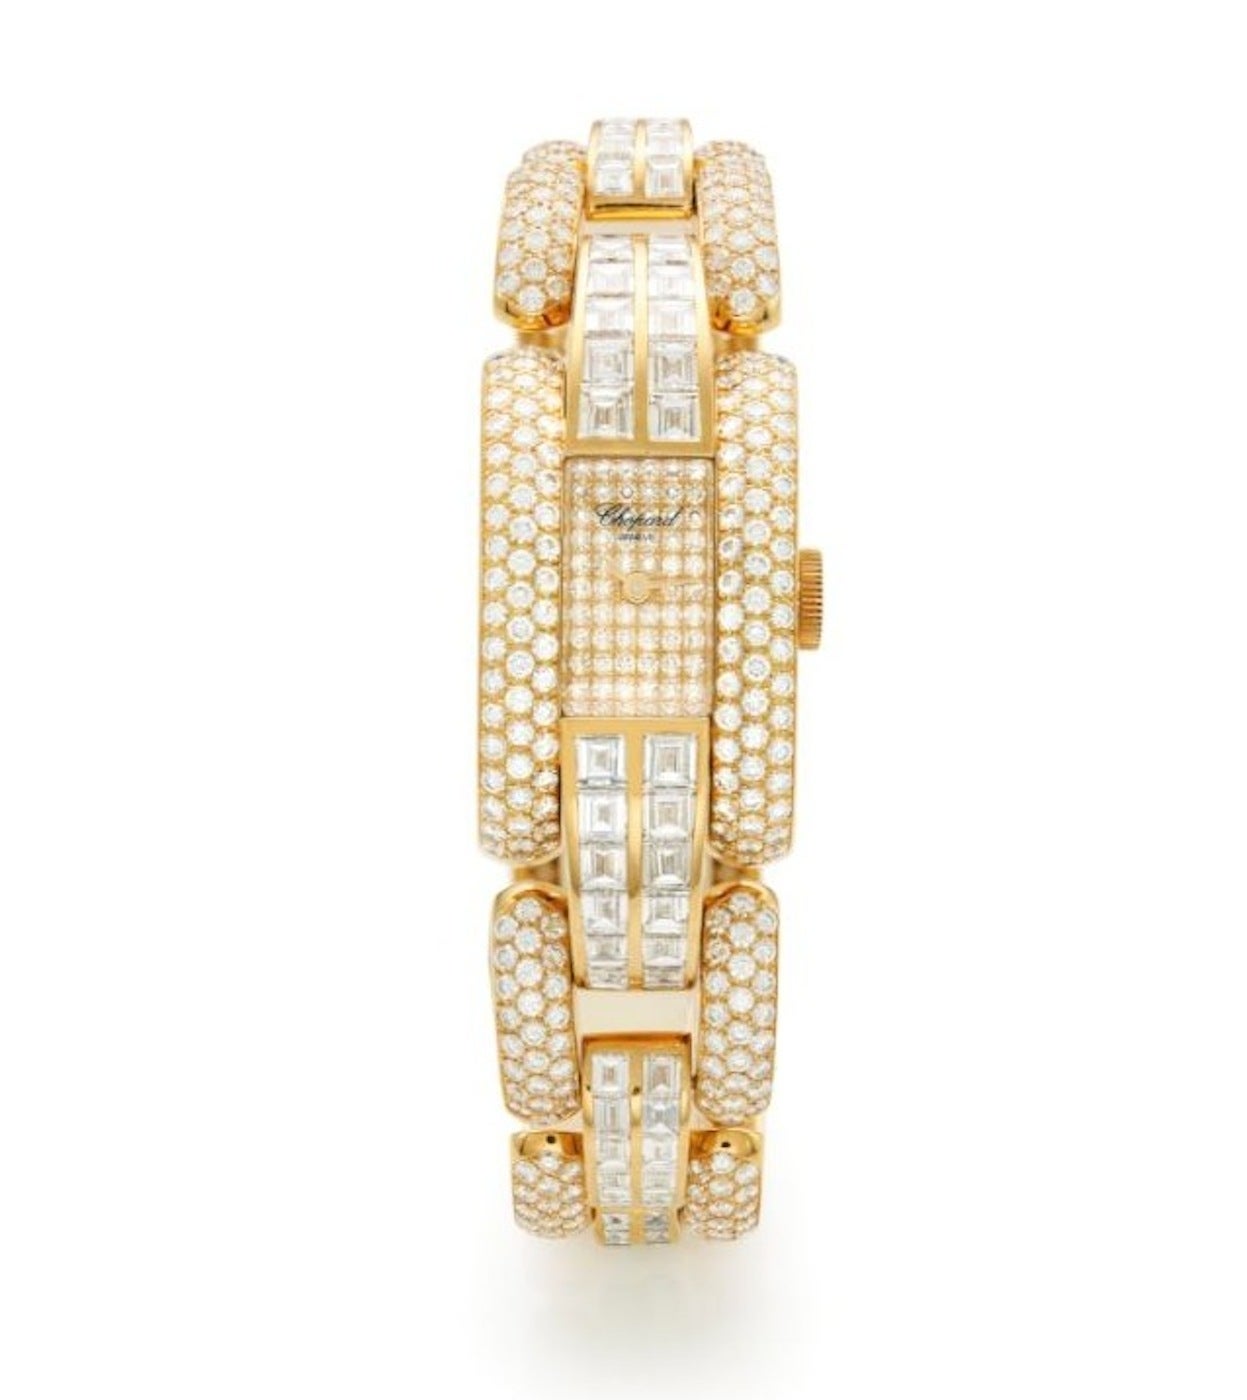 CHOPARD ‘STRADA’ circa 1995
Watch quartz movement, case and bracelet in yellow gold paved with round diamonds and two rows of baguette cut diamonds, case signed on the side, no. 475259, signed glass, ref 433 1, number 41 / 6562-20, dimensions 30 x